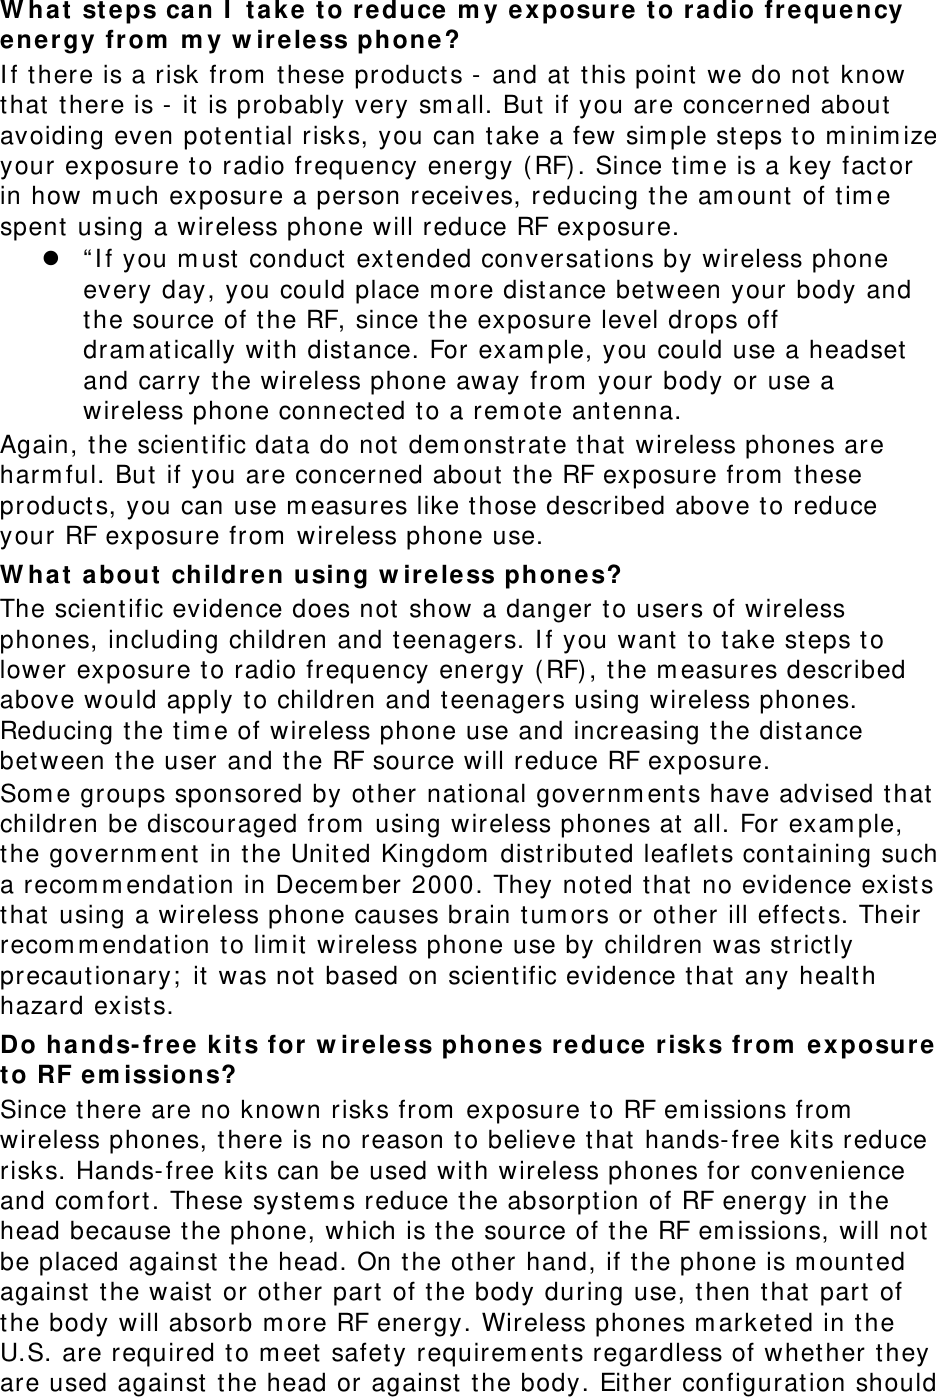 What steps can I take to reduce my exposure to radio frequency energy from my wireless phone? If there is a risk from these products - and at this point we do not know that there is - it is probably very small. But if you are concerned about avoiding even potential risks, you can take a few simple steps to minimize your exposure to radio frequency energy (RF). Since time is a key factor in how much exposure a person receives, reducing the amount of time spent using a wireless phone will reduce RF exposure.  “If you must conduct extended conversations by wireless phone every day, you could place more distance between your body and the source of the RF, since the exposure level drops off dramatically with distance. For example, you could use a headset and carry the wireless phone away from your body or use a wireless phone connected to a remote antenna. Again, the scientific data do not demonstrate that wireless phones are harmful. But if you are concerned about the RF exposure from these products, you can use measures like those described above to reduce your RF exposure from wireless phone use. What about children using wireless phones? The scientific evidence does not show a danger to users of wireless phones, including children and teenagers. If you want to take steps to lower exposure to radio frequency energy (RF), the measures described above would apply to children and teenagers using wireless phones. Reducing the time of wireless phone use and increasing the distance between the user and the RF source will reduce RF exposure. Some groups sponsored by other national governments have advised that children be discouraged from using wireless phones at all. For example, the government in the United Kingdom distributed leaflets containing such a recommendation in December 2000. They noted that no evidence exists that using a wireless phone causes brain tumors or other ill effects. Their recommendation to limit wireless phone use by children was strictly precautionary; it was not based on scientific evidence that any health hazard exists.  Do hands-free kits for wireless phones reduce risks from exposure to RF emissions? Since there are no known risks from exposure to RF emissions from wireless phones, there is no reason to believe that hands-free kits reduce risks. Hands-free kits can be used with wireless phones for convenience and comfort. These systems reduce the absorption of RF energy in the head because the phone, which is the source of the RF emissions, will not be placed against the head. On the other hand, if the phone is mounted against the waist or other part of the body during use, then that part of the body will absorb more RF energy. Wireless phones marketed in the U.S. are required to meet safety requirements regardless of whether they are used against the head or against the body. Either configuration should 